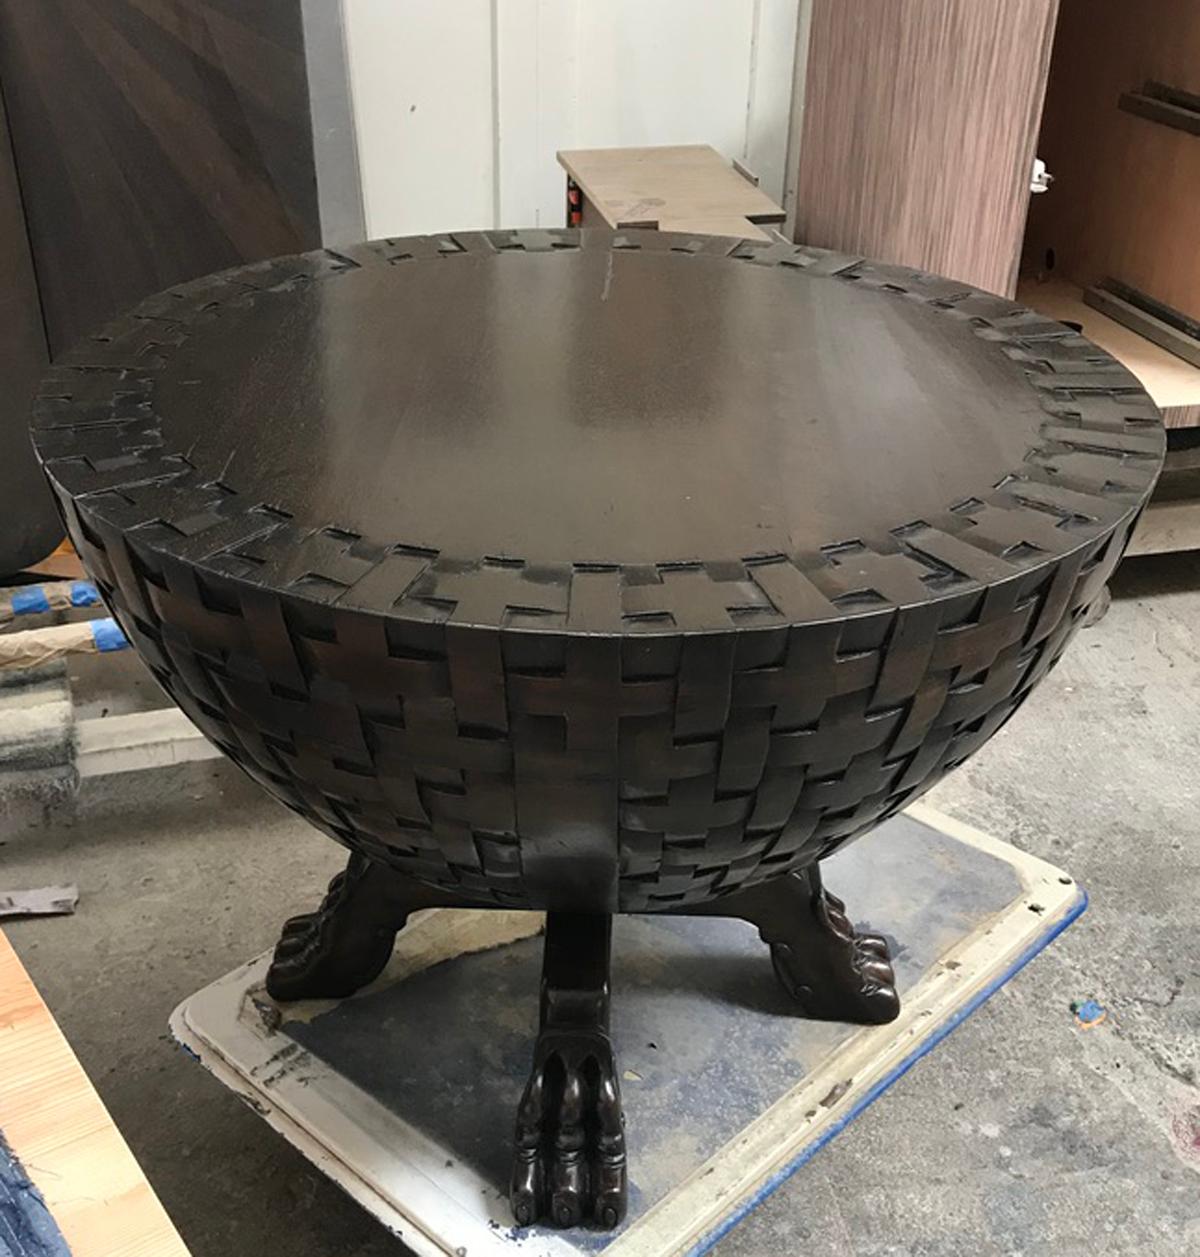 Custom hand carved table with basketweave motif and animal feet. Shown here in Mahogany in a medium to dark finish and light to medium distress. Can be made in any size and finish.
Made in Los Angeles by Dos Gallos Studio.
CUSTOM PRICES ARE SUBJECT